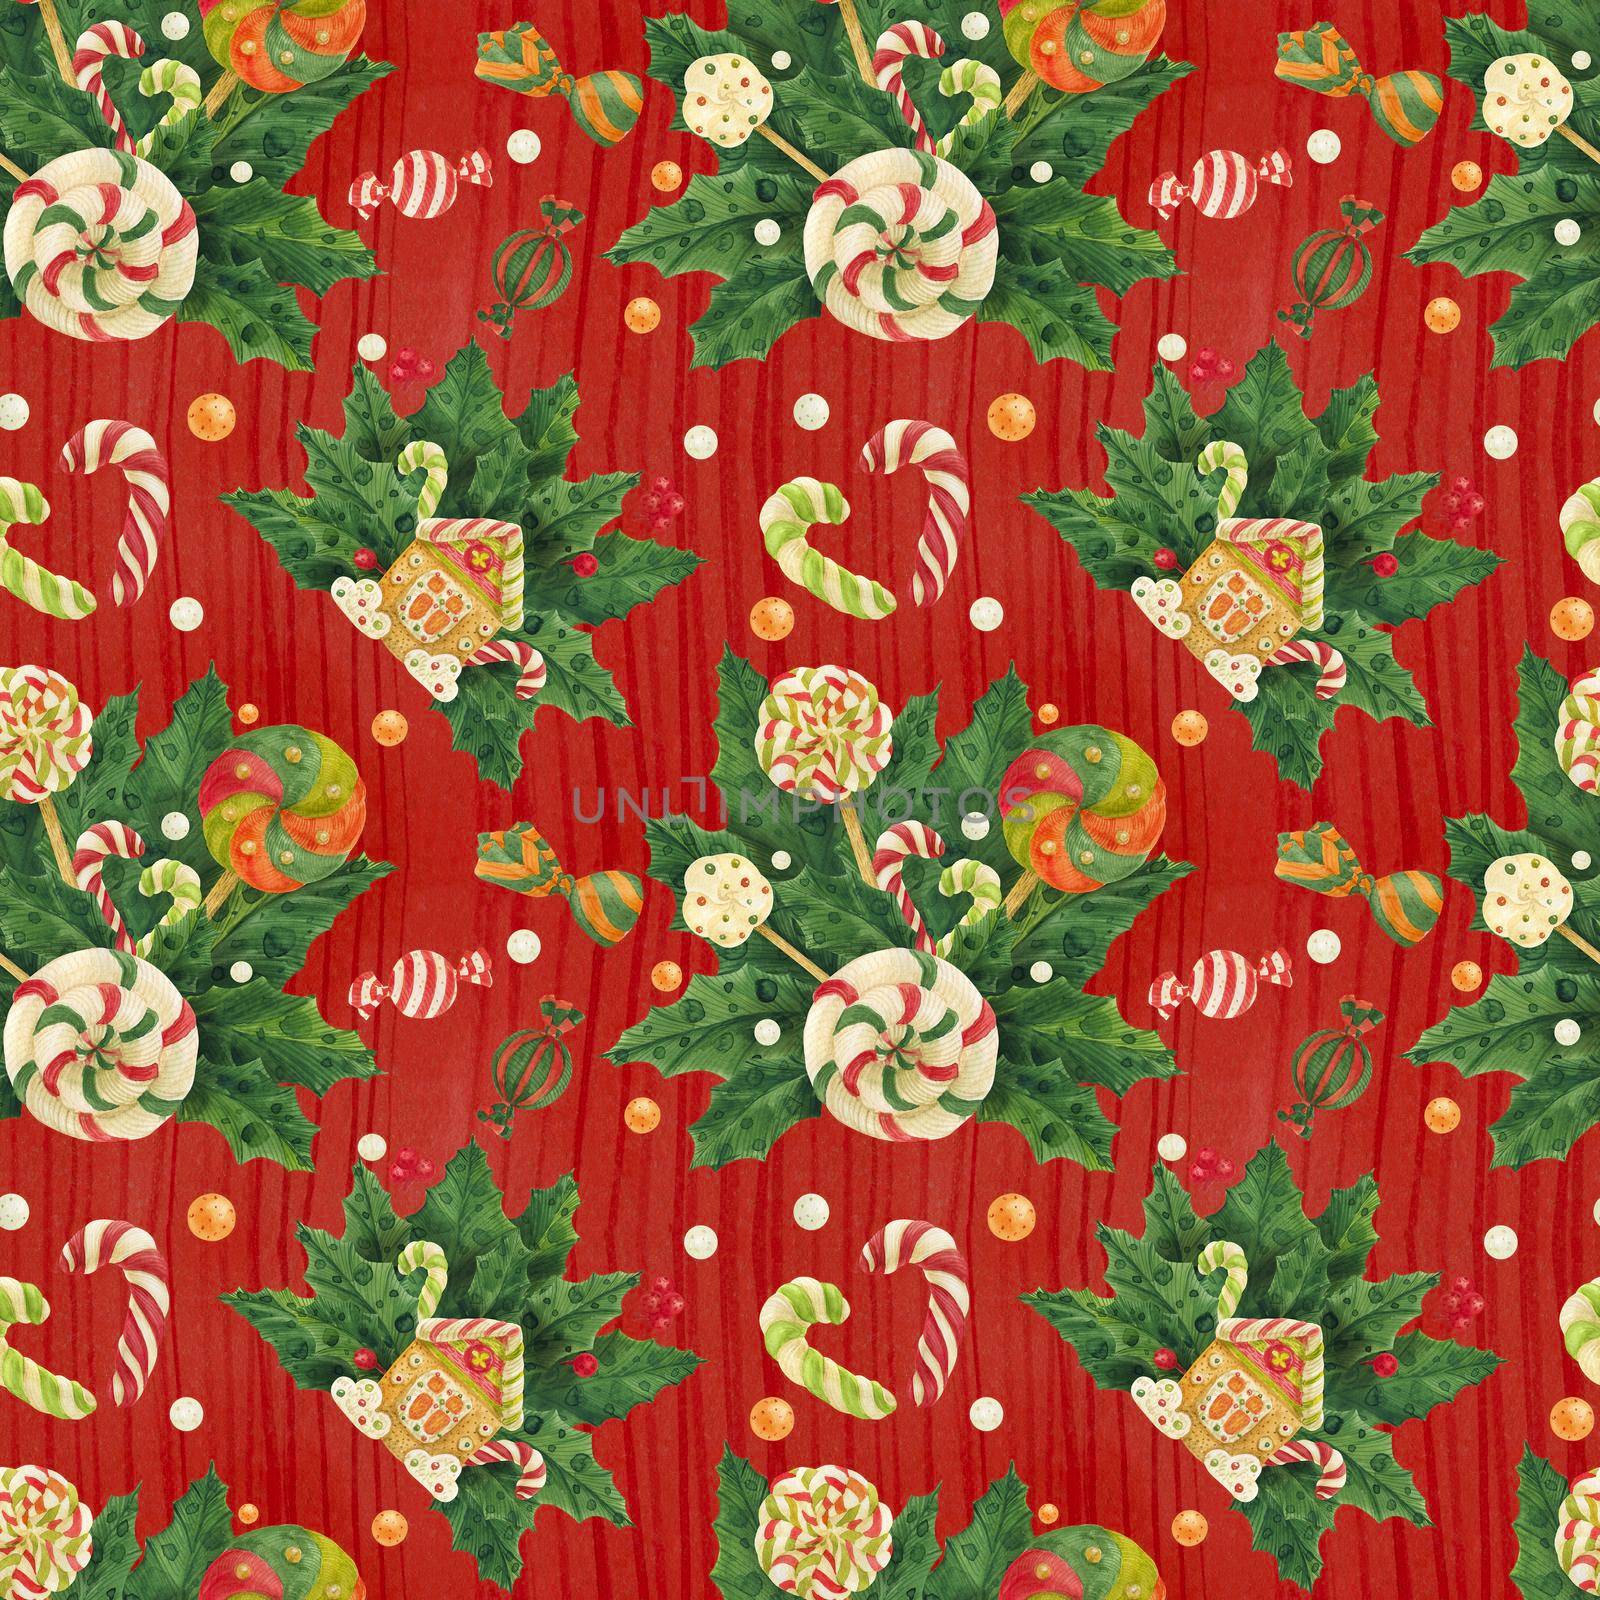 Christmas Holly watercolor red seamless pattern with candy cane and lollipop bouquet